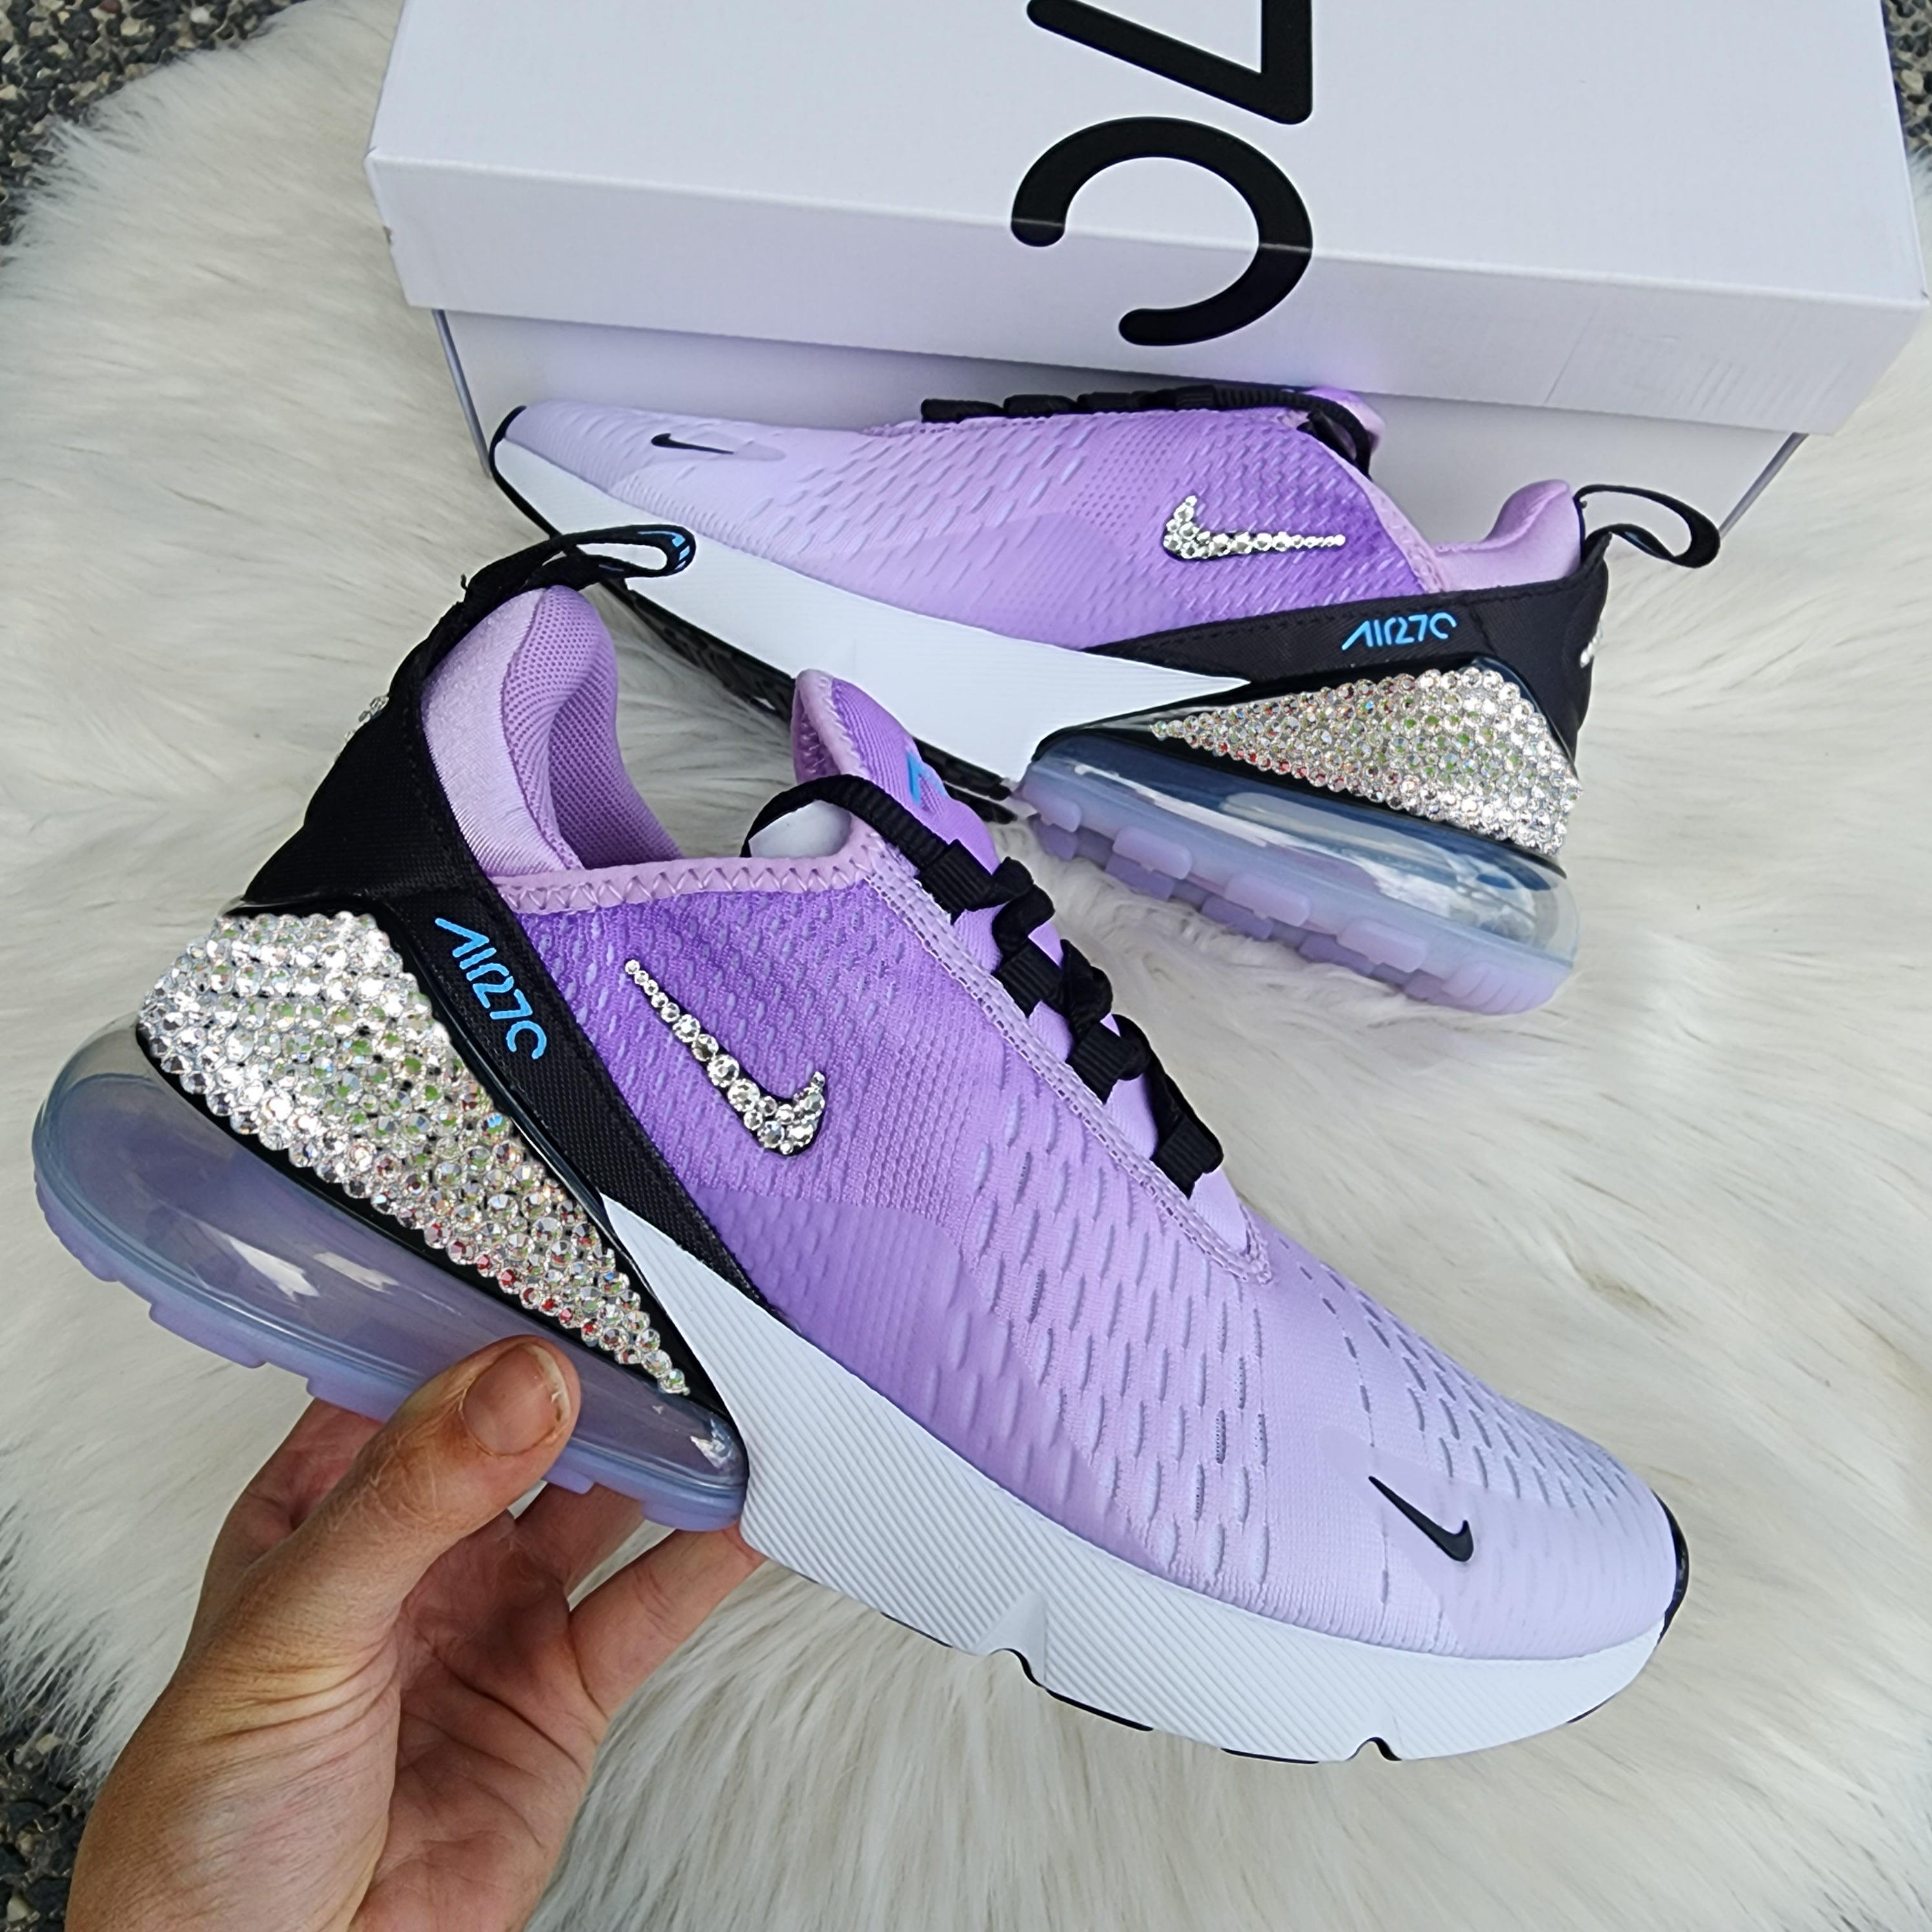 Nike Women's Air Max 270 Running Shoe, Limited Edition Color